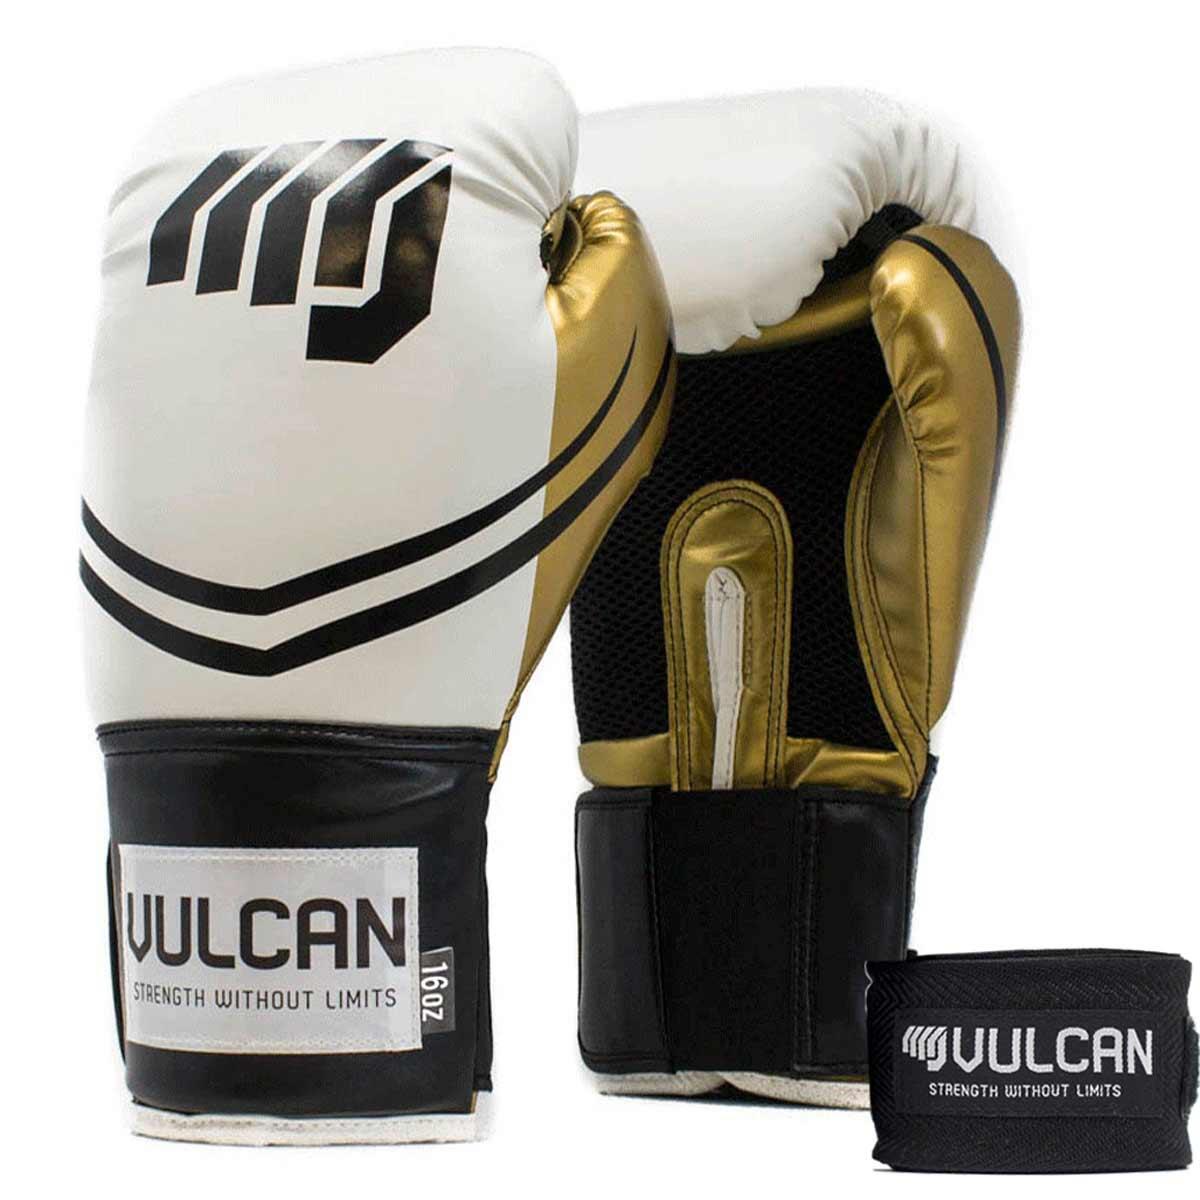 VULCAN BOXING GLOVES 16oz WHITE/GOLD WITH HANDWRAPS 1/7